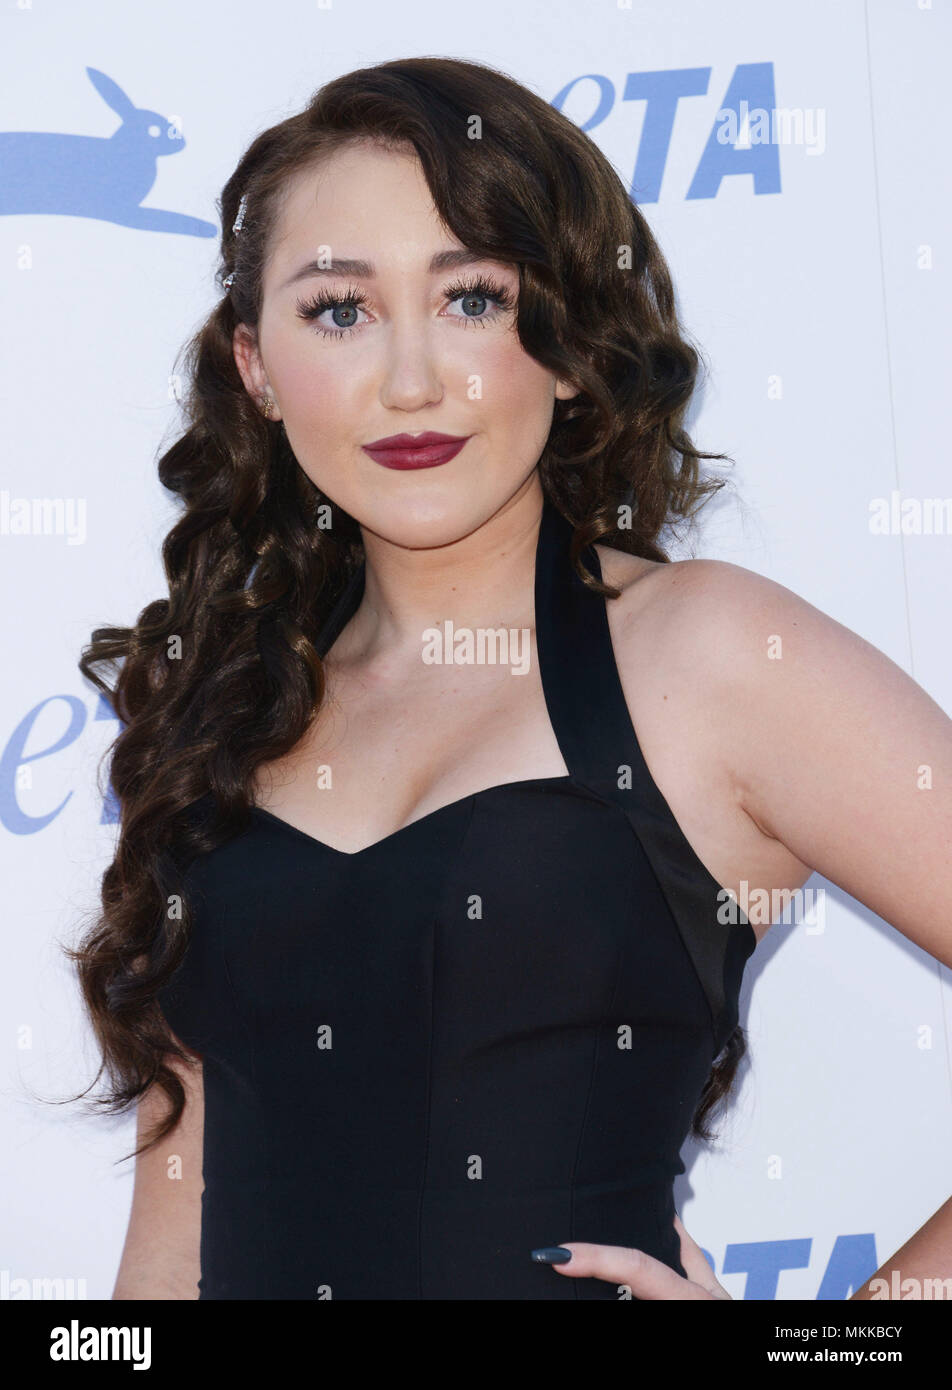 Noah Cyrus 021 at the PETA s 35th anniversary bash at the Hollywood Palladium in Los angeles. September 30, 2015Noah Cyrus 021  Event in Hollywood Life - California,  Red Carpet Event, Vertical, USA, Film Industry, Celebrities,  Photography, Bestof, Arts Culture and Entertainment, Topix Celebrities fashion / one person, Vertical, Best of, Hollywood Life, Event in Hollywood Life - California,  Red Carpet and backstage, USA, Film Industry, Celebrities,  movie celebrities, TV celebrities, Music celebrities, Photography, Bestof, Arts Culture and Entertainment,  Topix, headshot, vertical, from the  Stock Photo